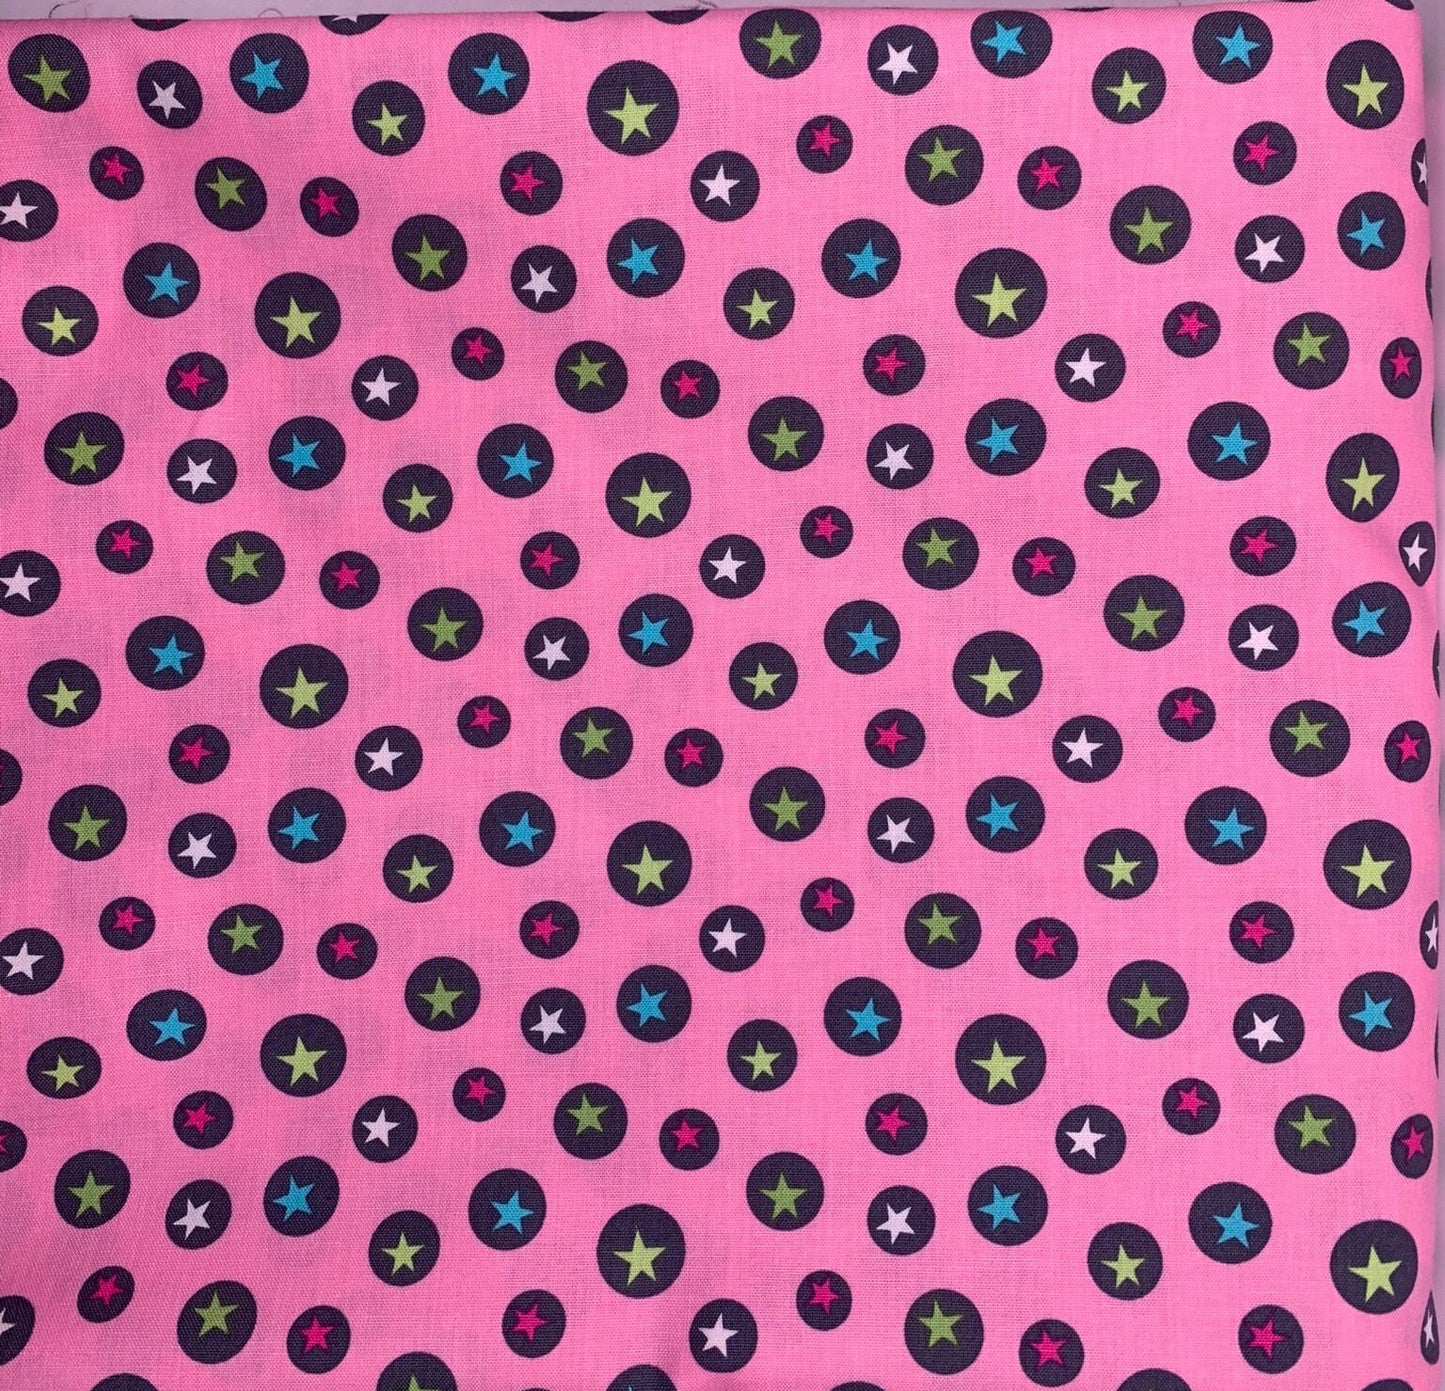 High Quality Quilt Fabric-Sold by the Yard-Robert Kaufman-Pink Stars pattern- 100% Cotton Fabric